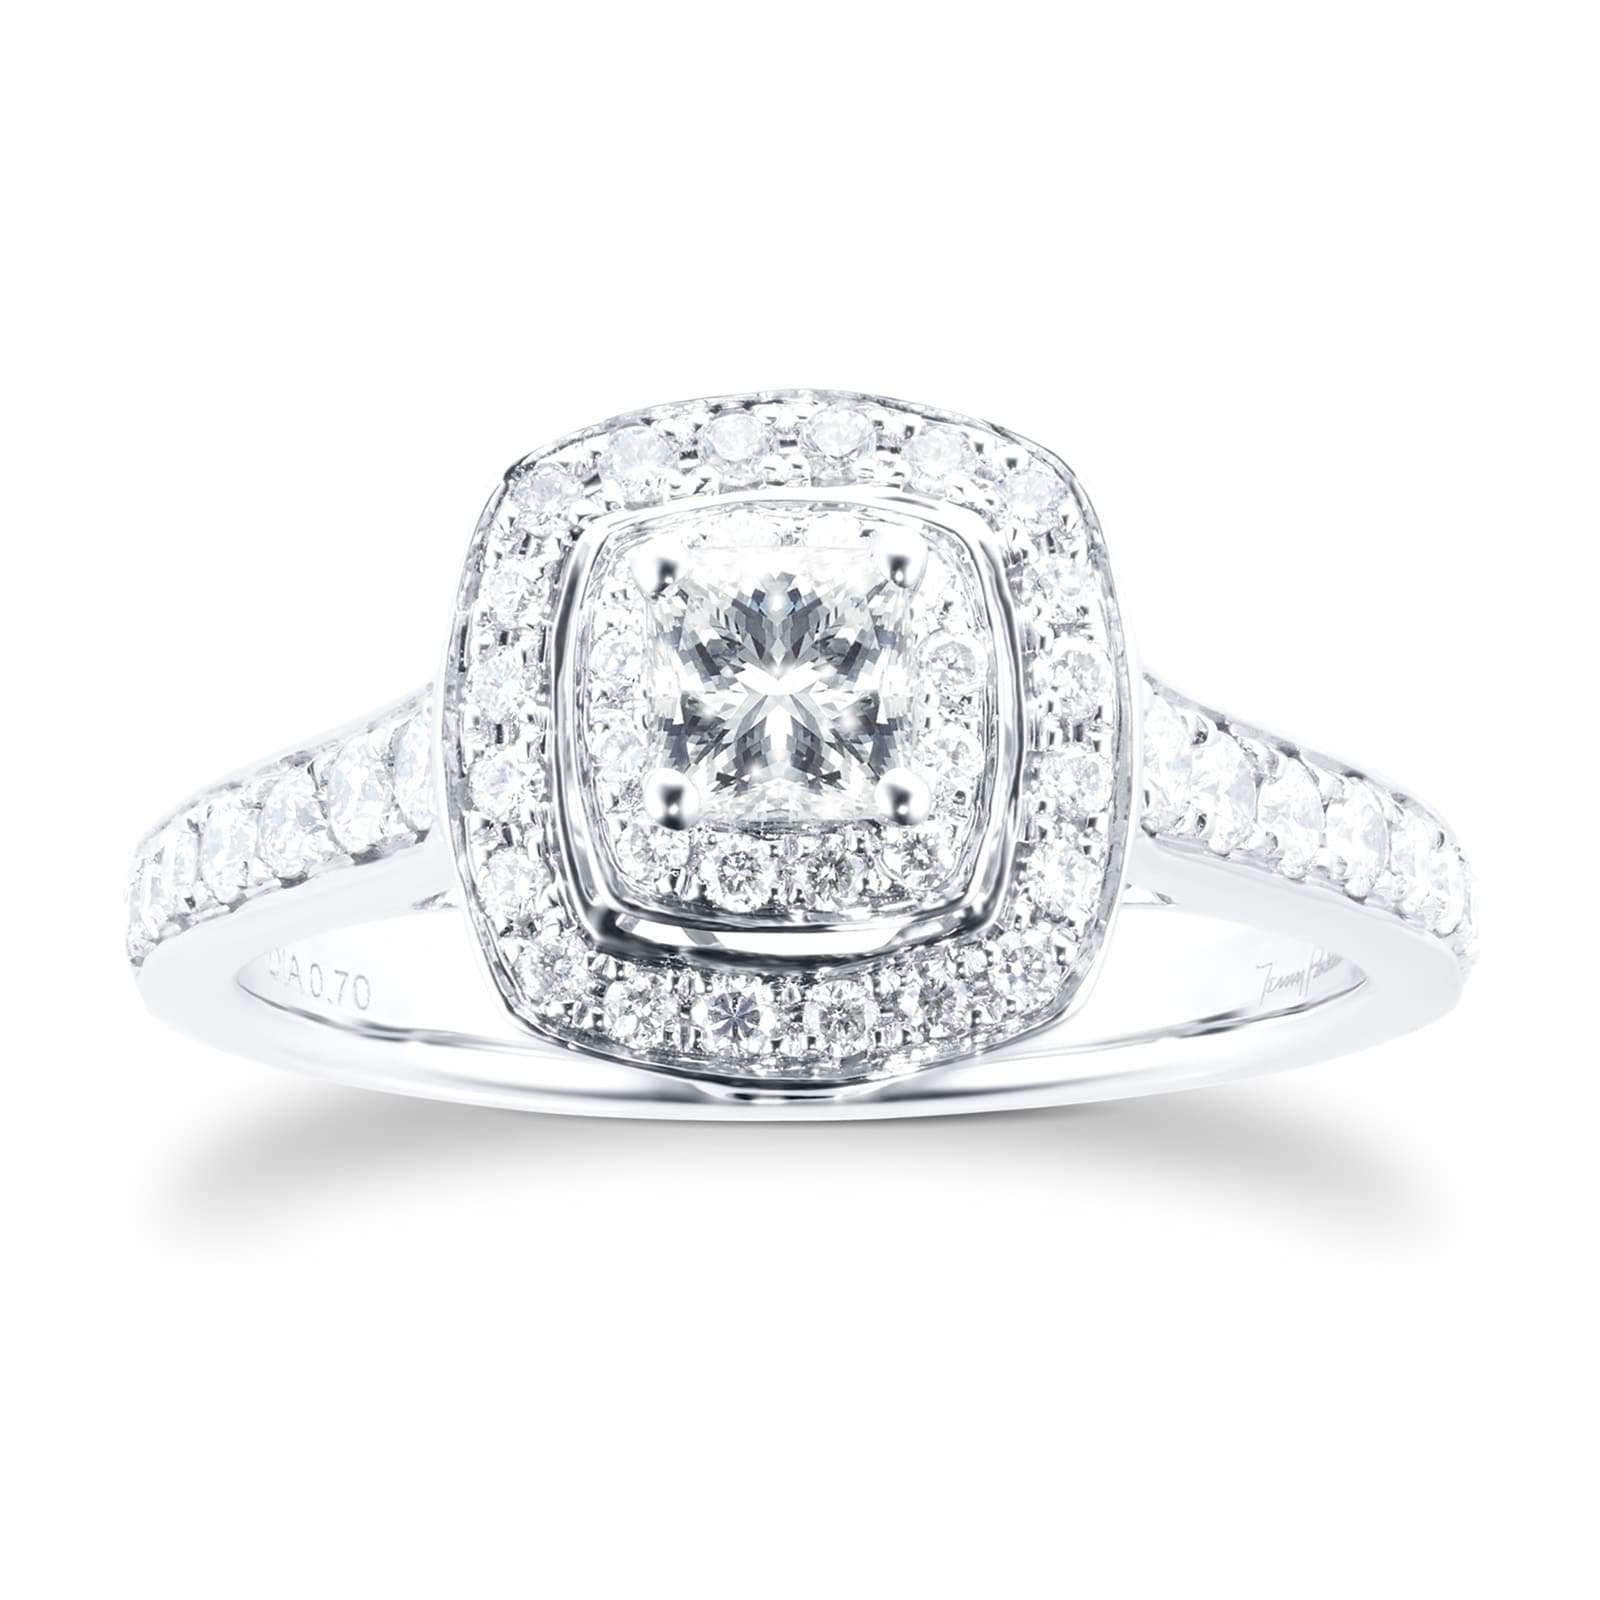 Cushion Cut 0.70 Carat Total Weight Double Halo Diamond Ring In 18 Carat White Gold - Ring Size K